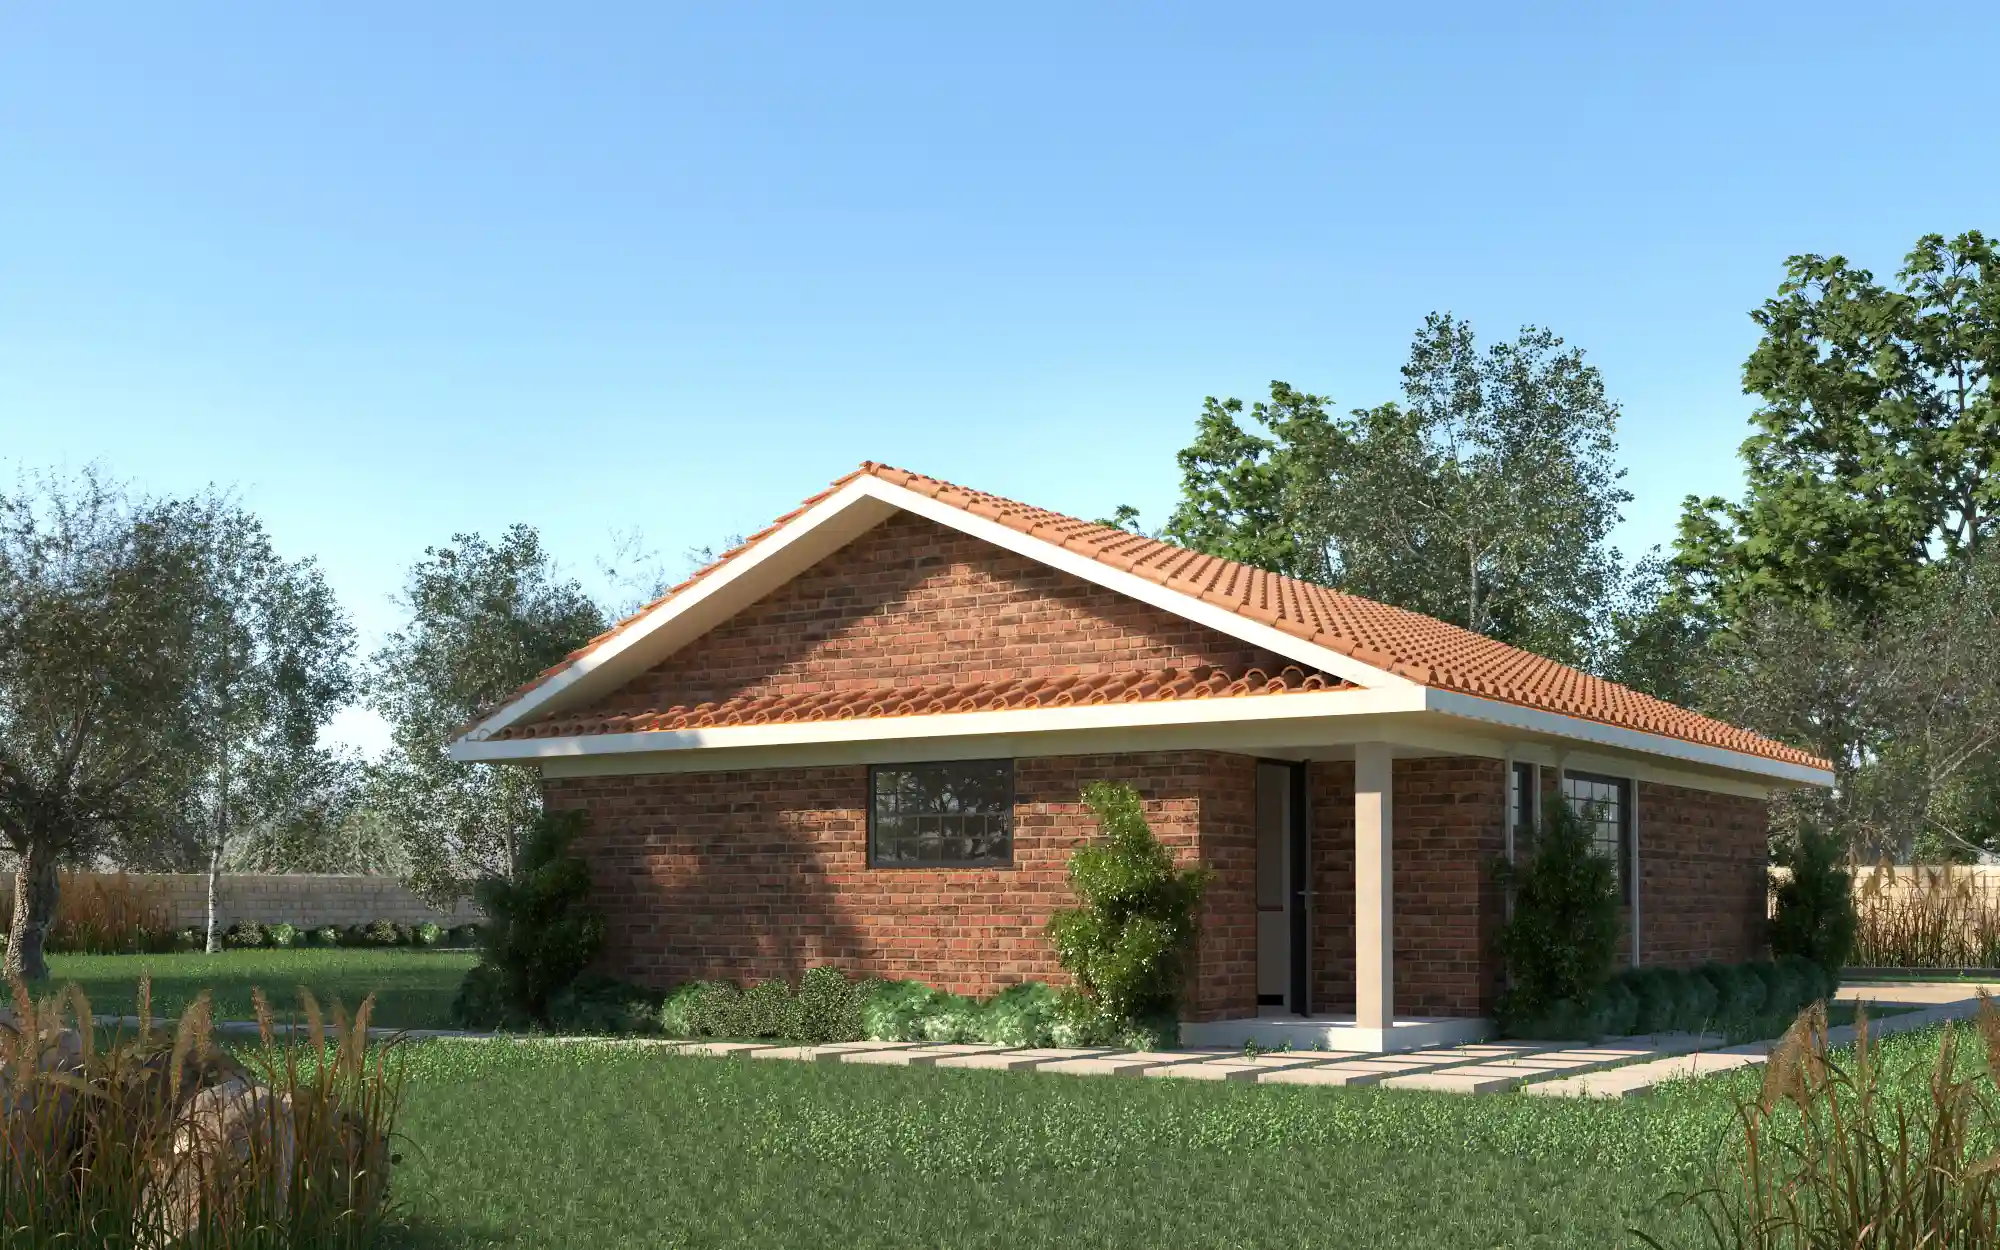 2 Bedroom Bungalow -ID 2111 - 2 BED BNGL TP1 OP1 REAR.jpg from Inuua Tujenge house plans with 2 bedrooms and 1 bathrooms. ( bungalow )